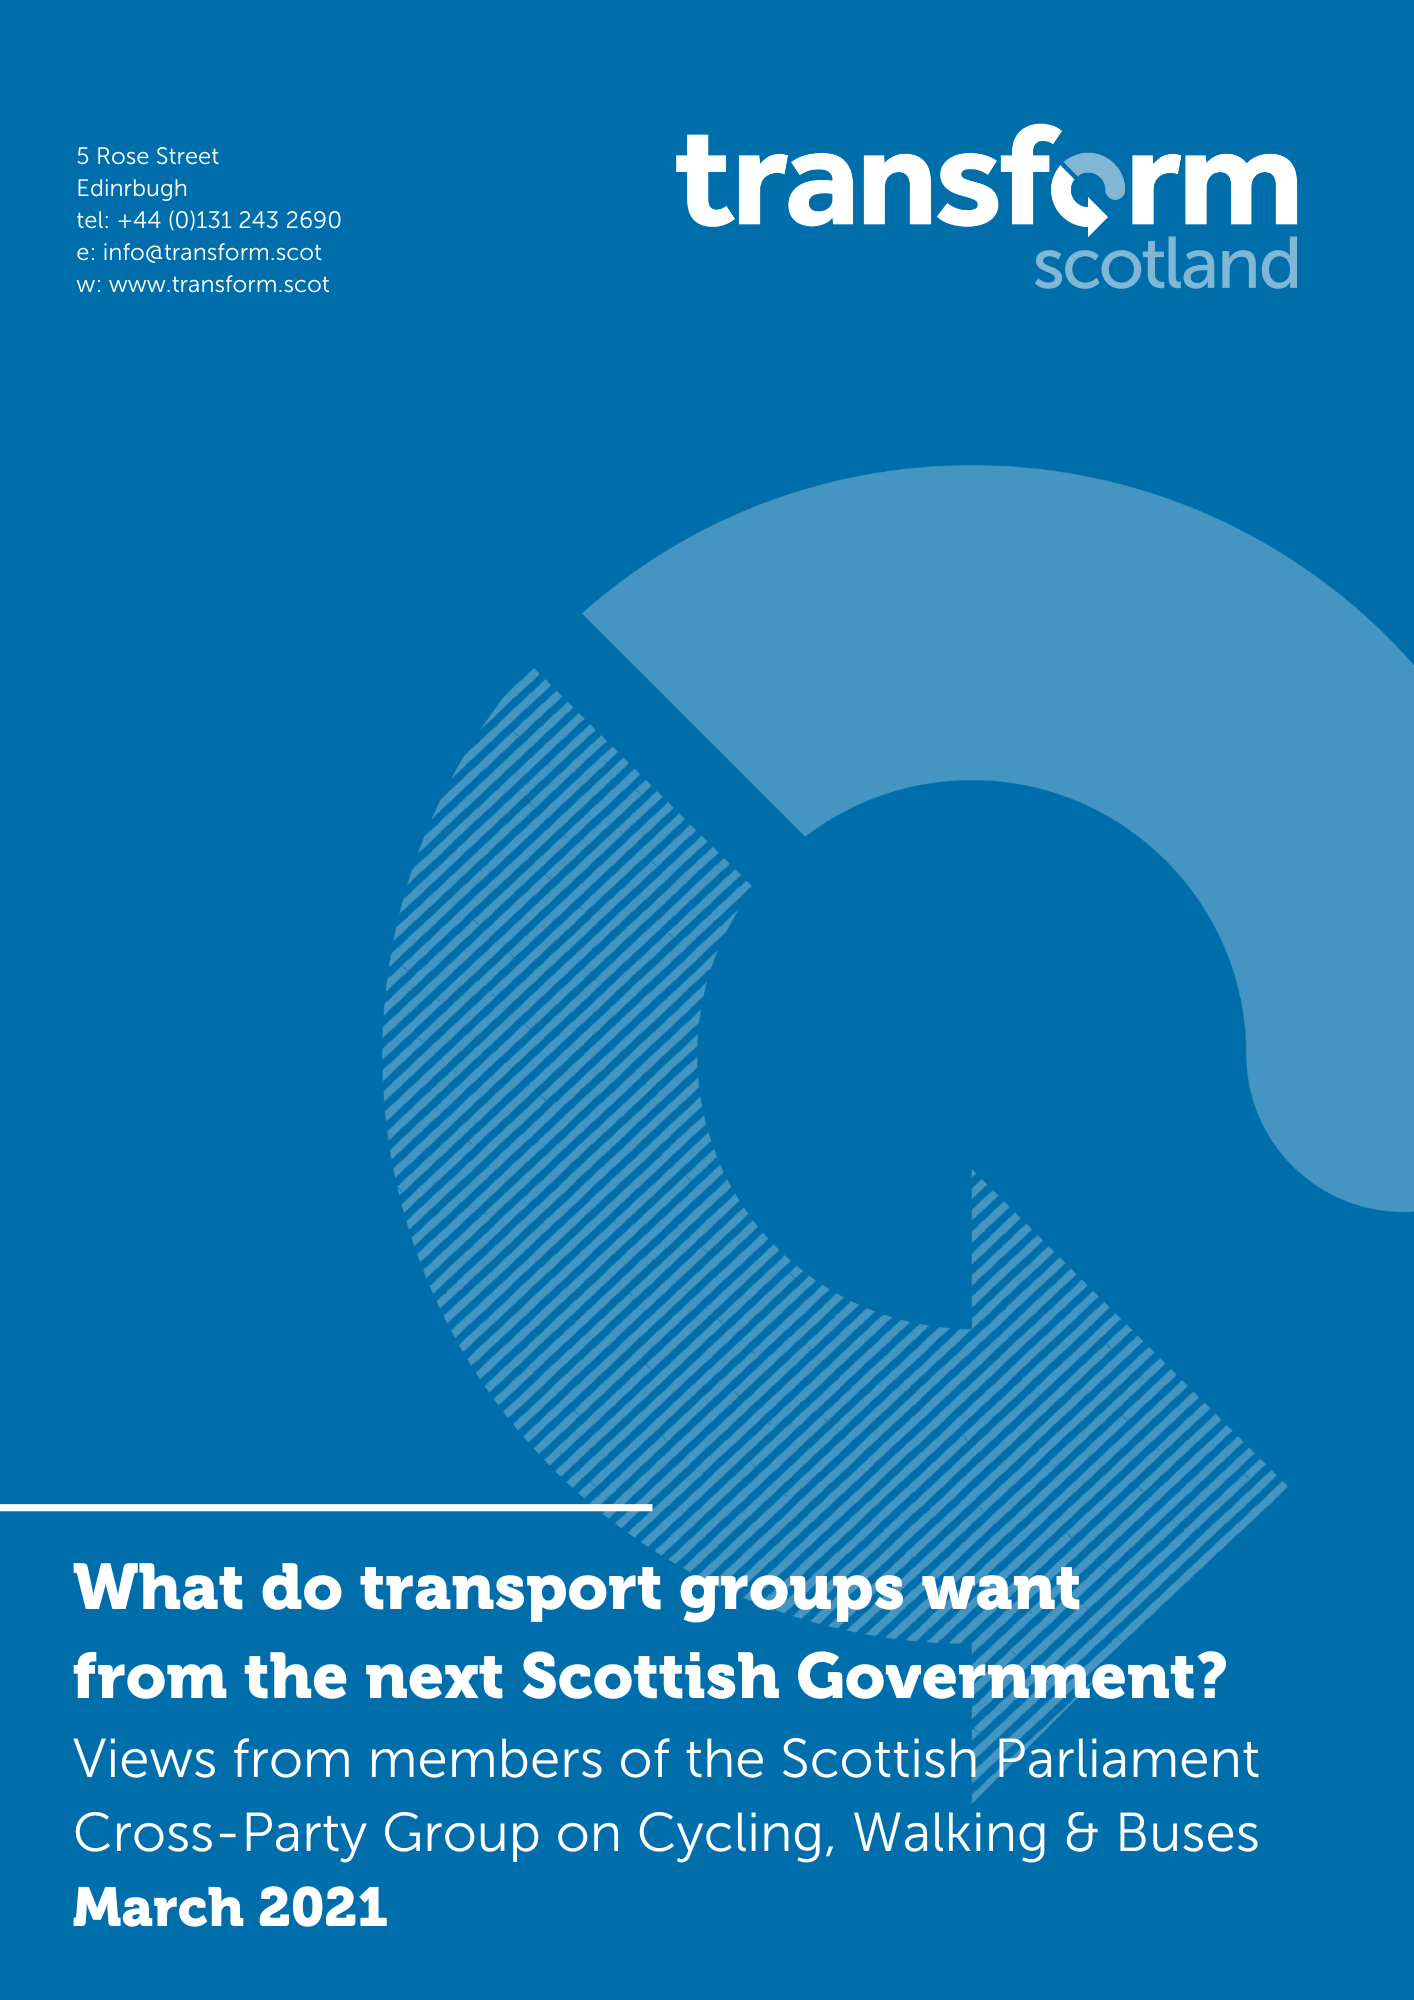 What do transport groups want from the next Scottish Government?